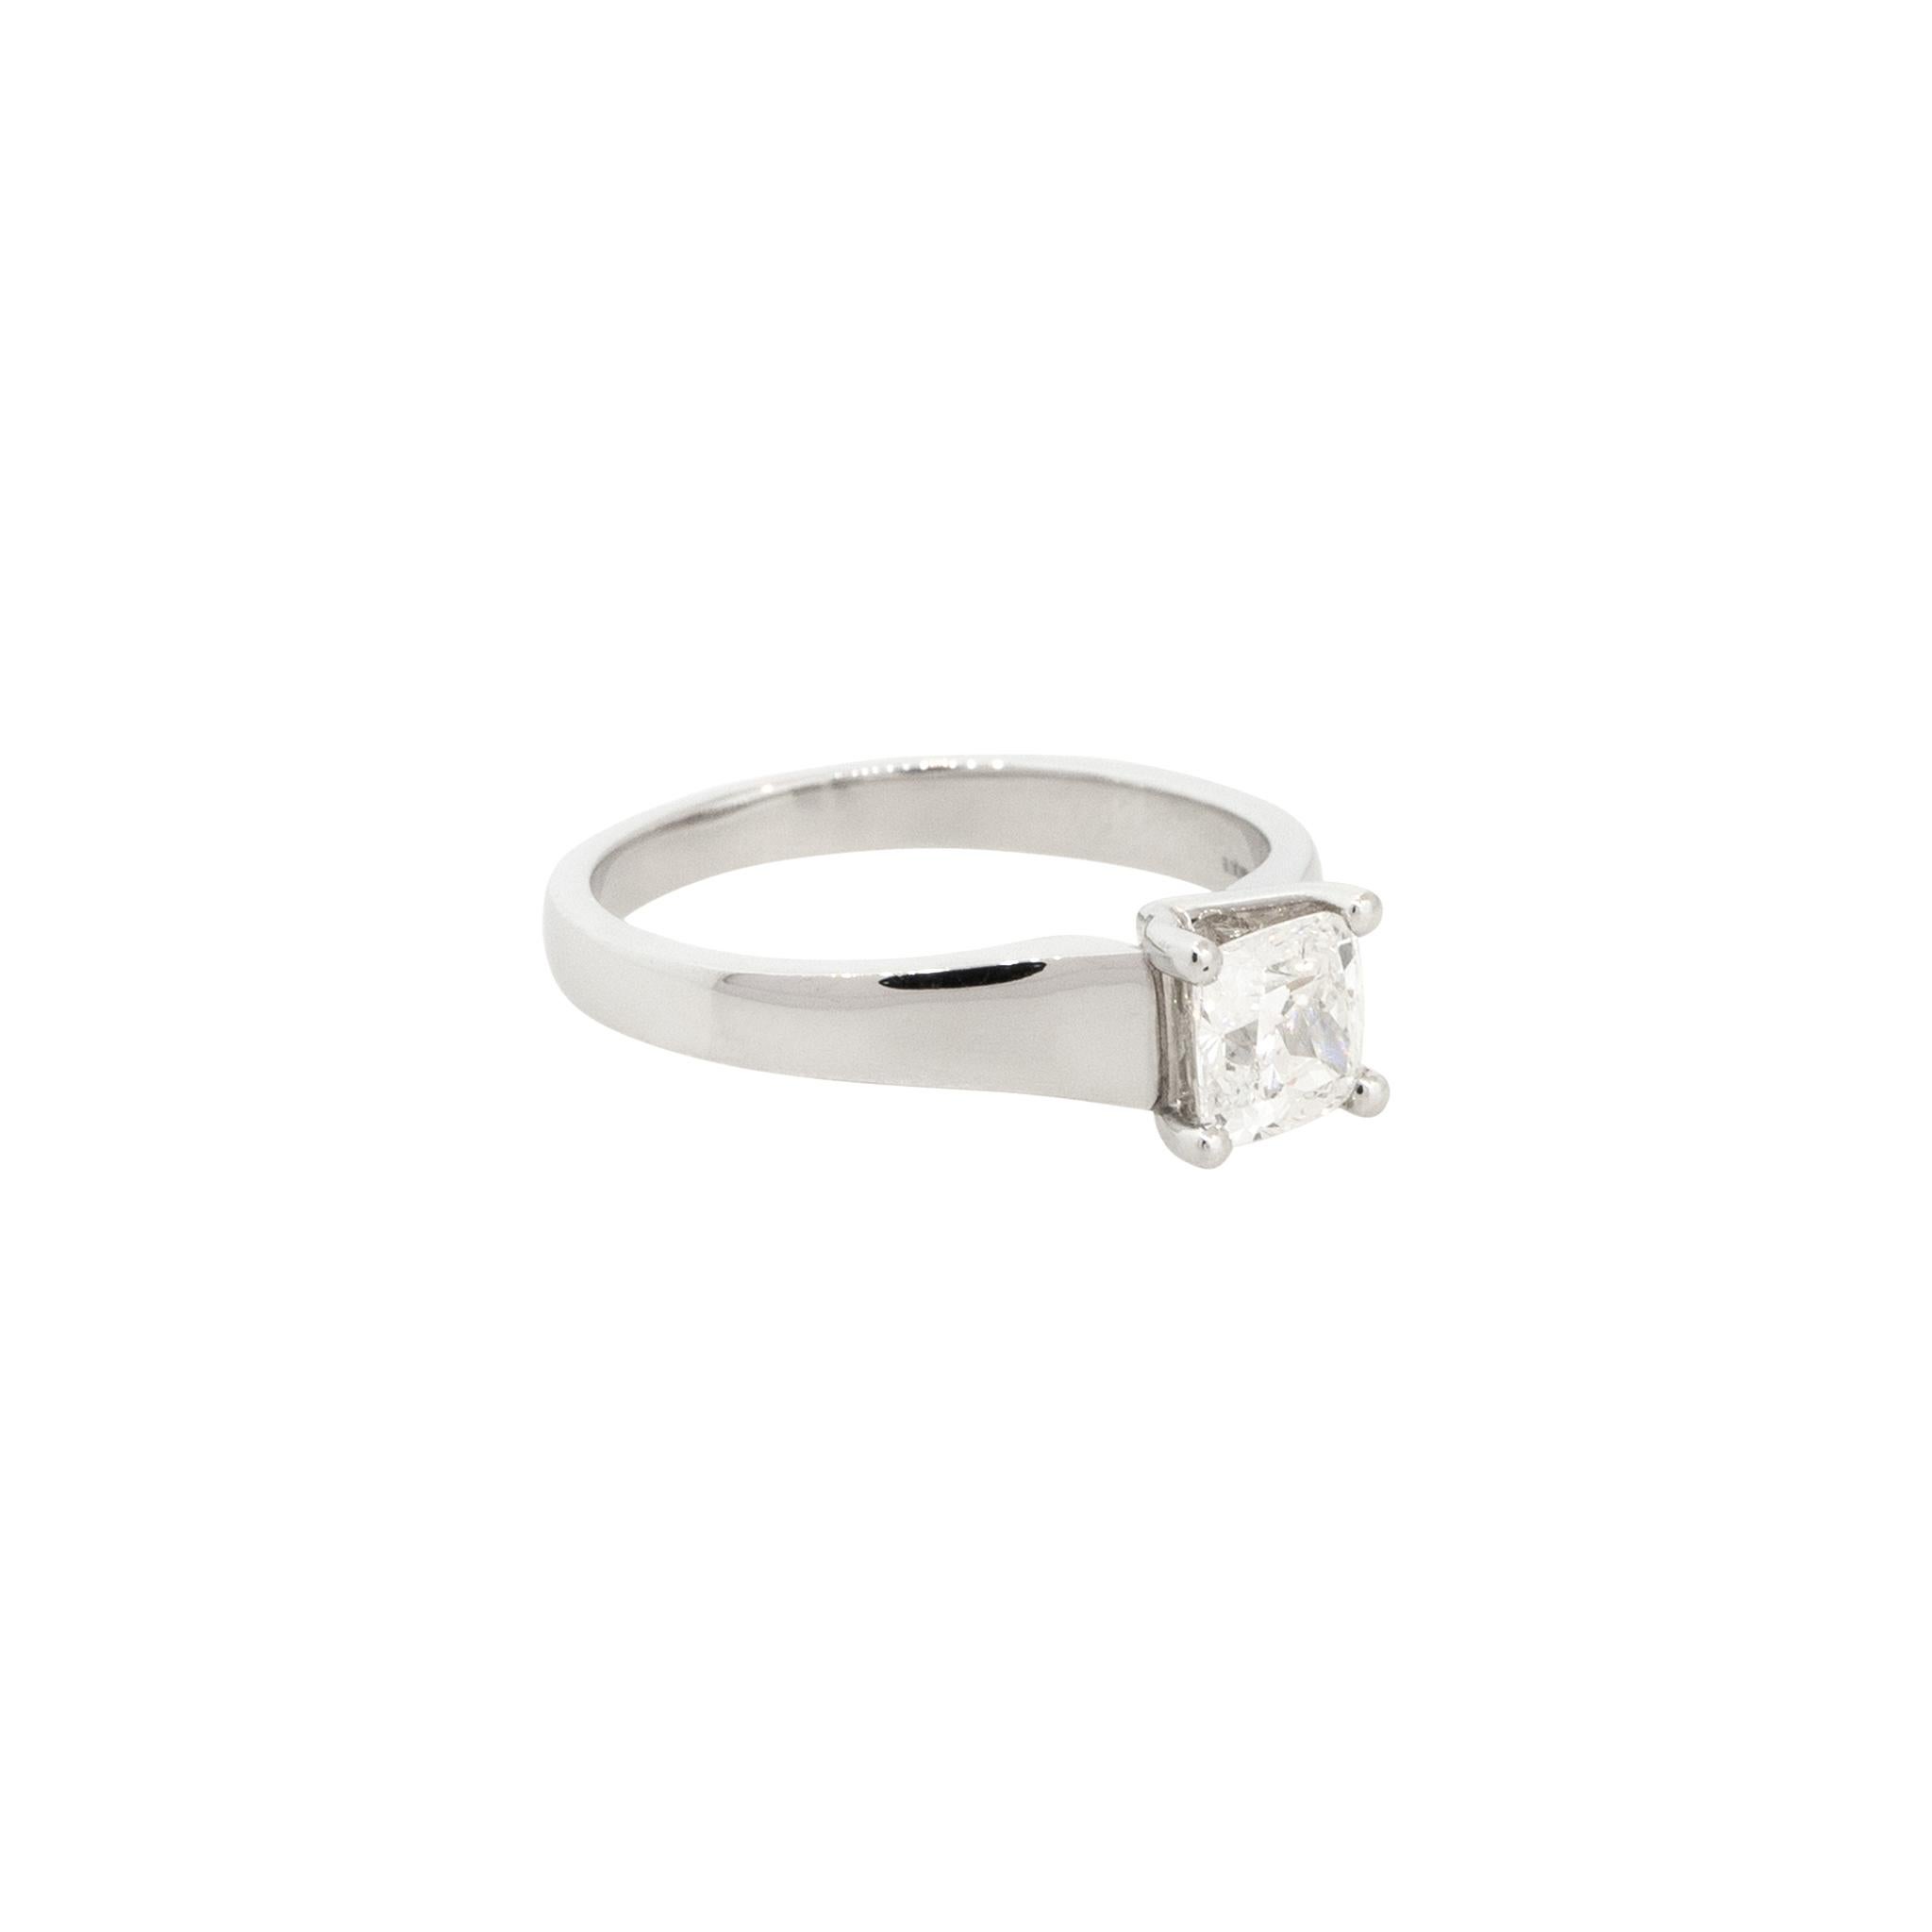 Birks Amorique Platinum 0.73ctw Diamond Engagement Ring
Material: Platinum
Diamond Details: Approx. 0.73ctw Cushion Modified Brilliant Diamond. Center Diamond is G in color and VVS2 in clarity
Dimensions: 5.28 - 5.23 x 3.32 mm
Ring Size: 5.75 (Can